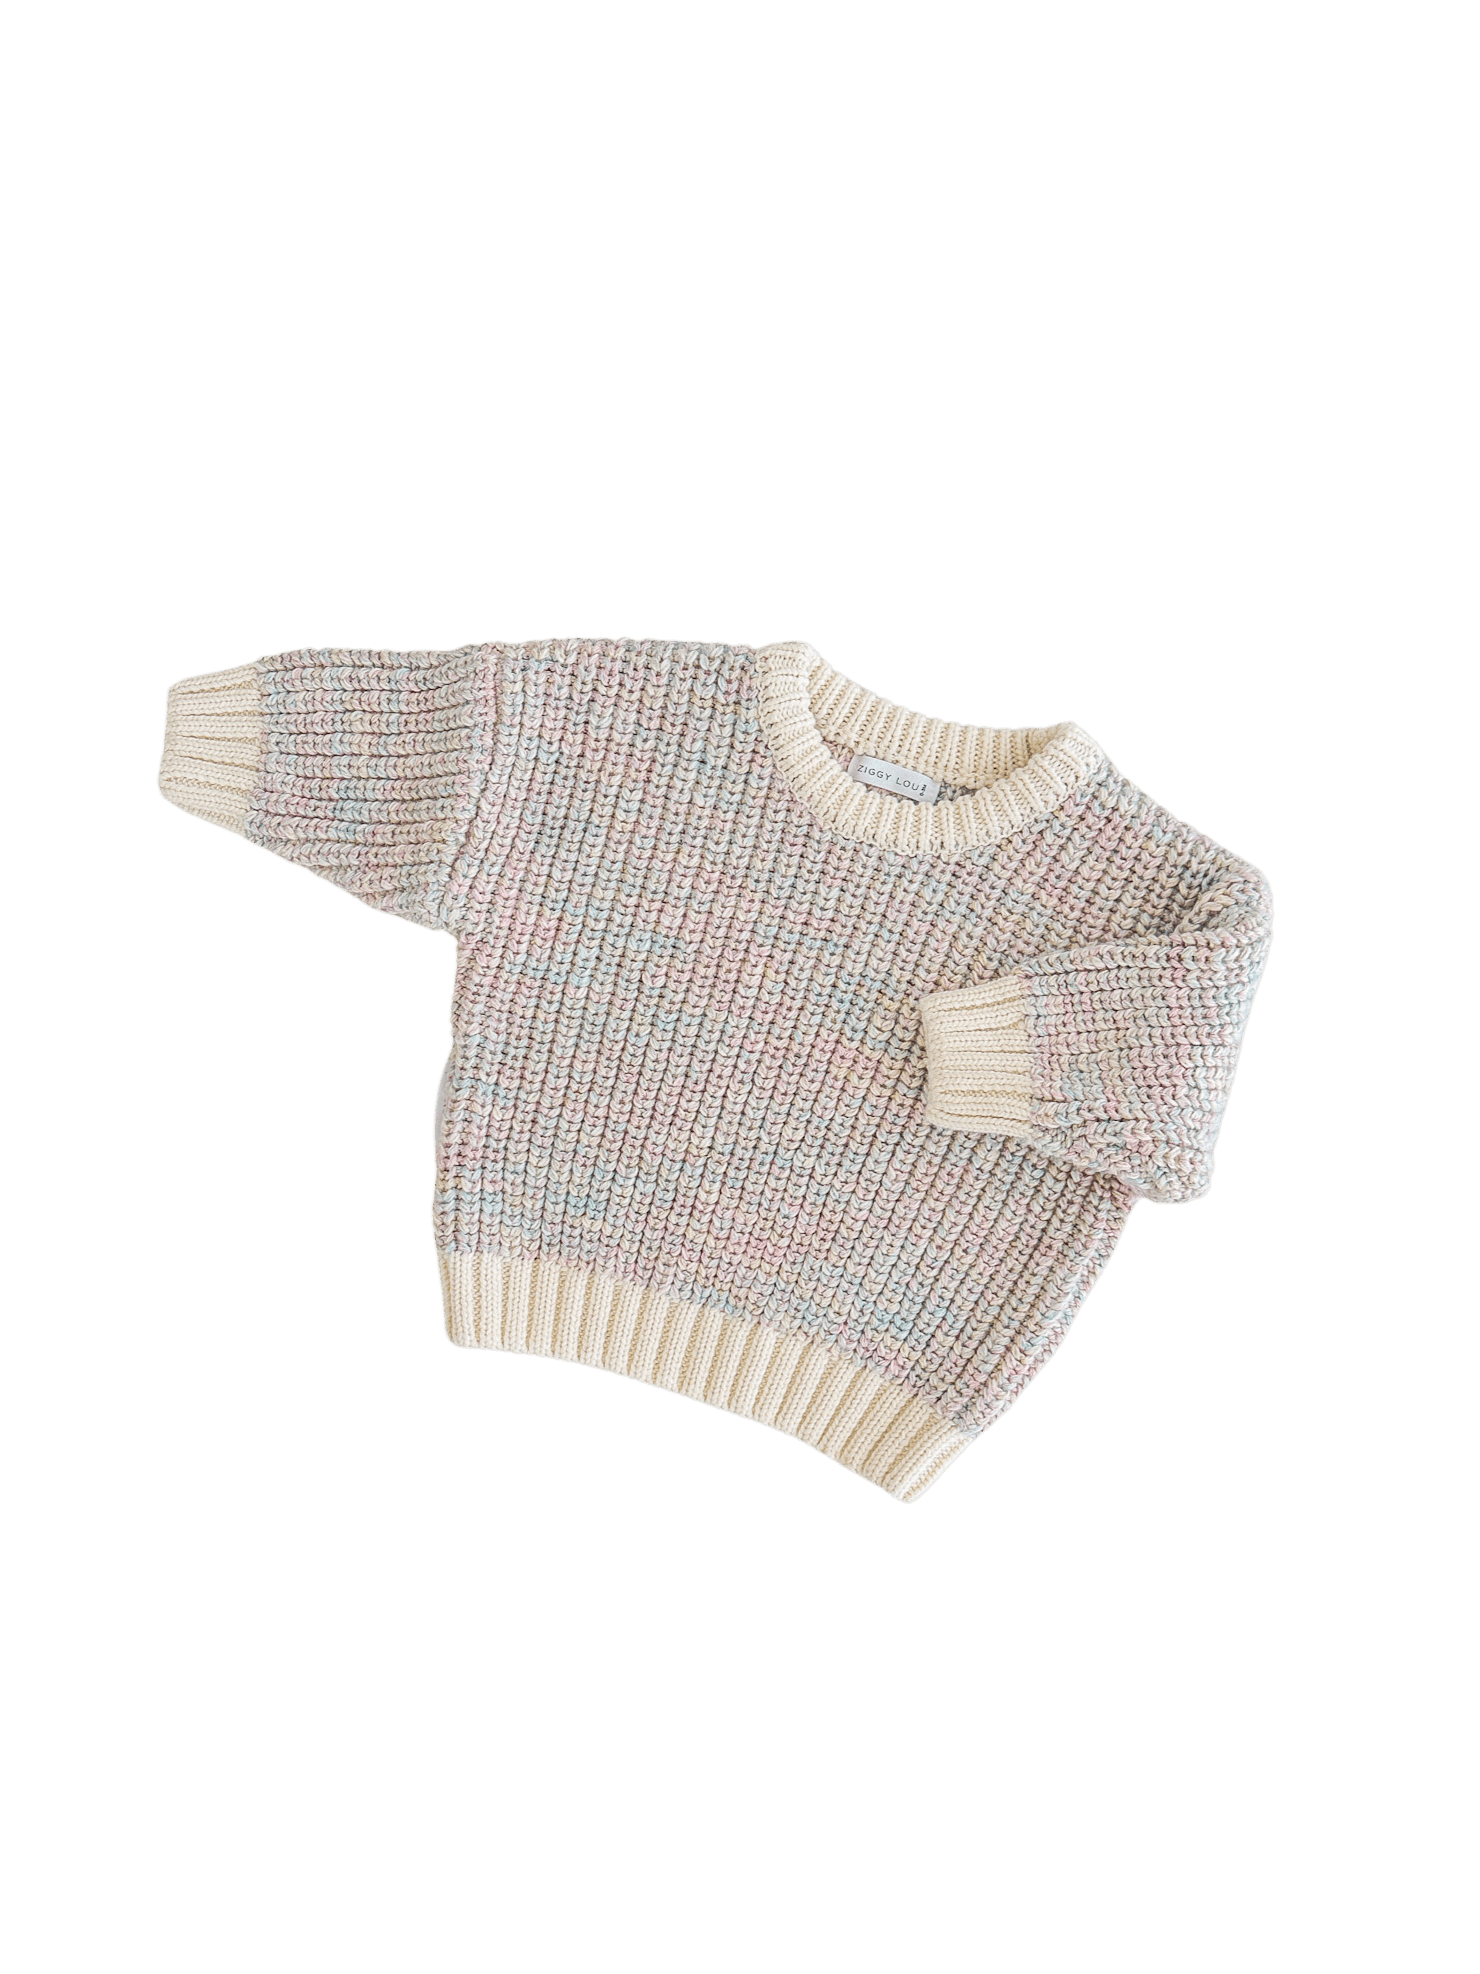 Super Chunky Knit Sweater | Sprinkle